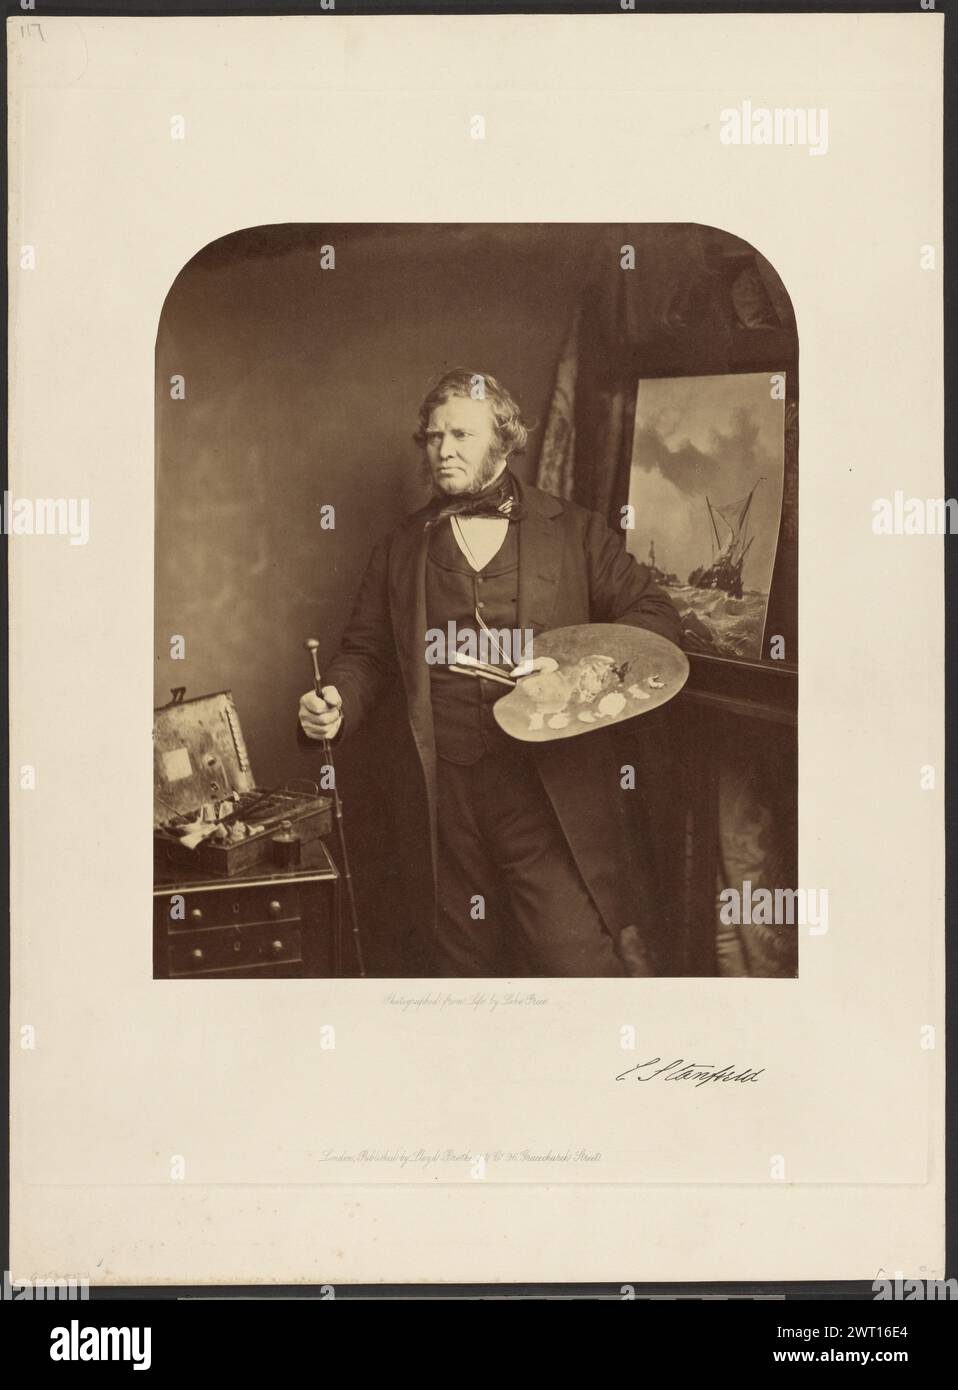 Clarkson Frederick Stanfield. William Lake Price, photographer (British, 1810 - 1896) about 1857 Painter Clarkson Stanfield stands in front of an easel, holding a cane in his left hand and an artist’s palette in his right. The unfinished painting behind him features a sailing ship in a stormy sea. (Recto, mount) upper left, in pencil: '117'; Lower left, in pencil: 'A53000'; Lower center, imprint in grey ink: 'Photographed from Life by Lake Price/ London Published by Lloyd Brothers & Co. 96, Gracechurch Street.' Lower right, in black ink: 'C. Stanfield' [signature of the subject]; in pencil: '0 Stock Photo